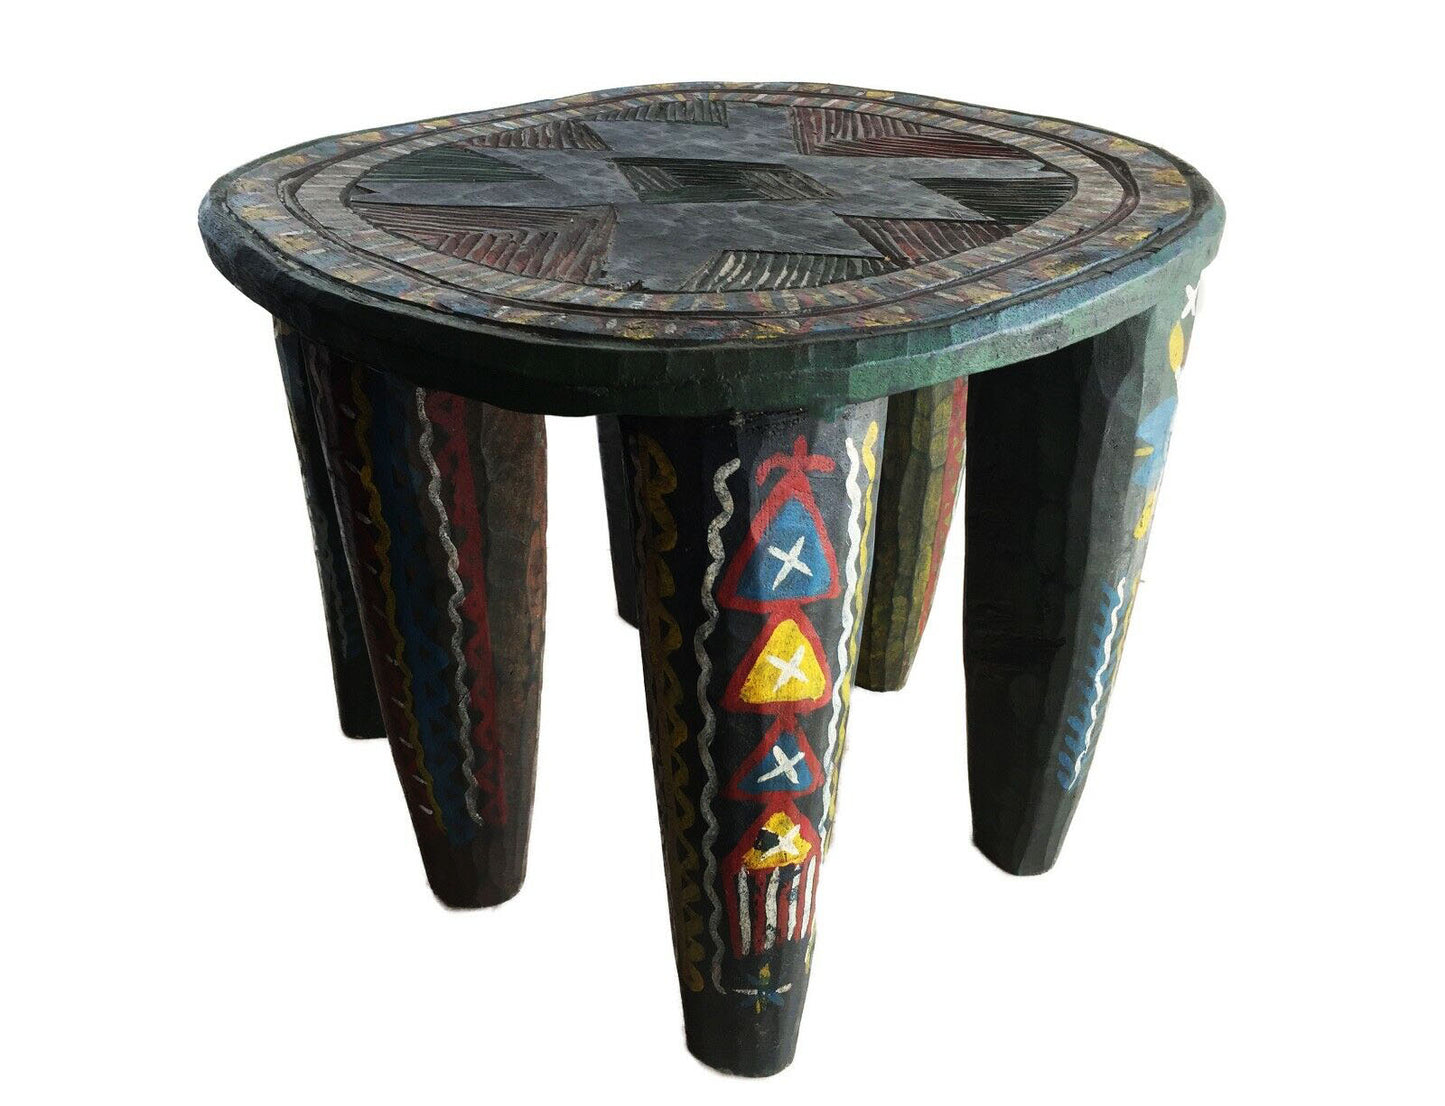 #2169 African LG Colorful  Nupe Stool / Table Nigeria  14" H by 17.5" W